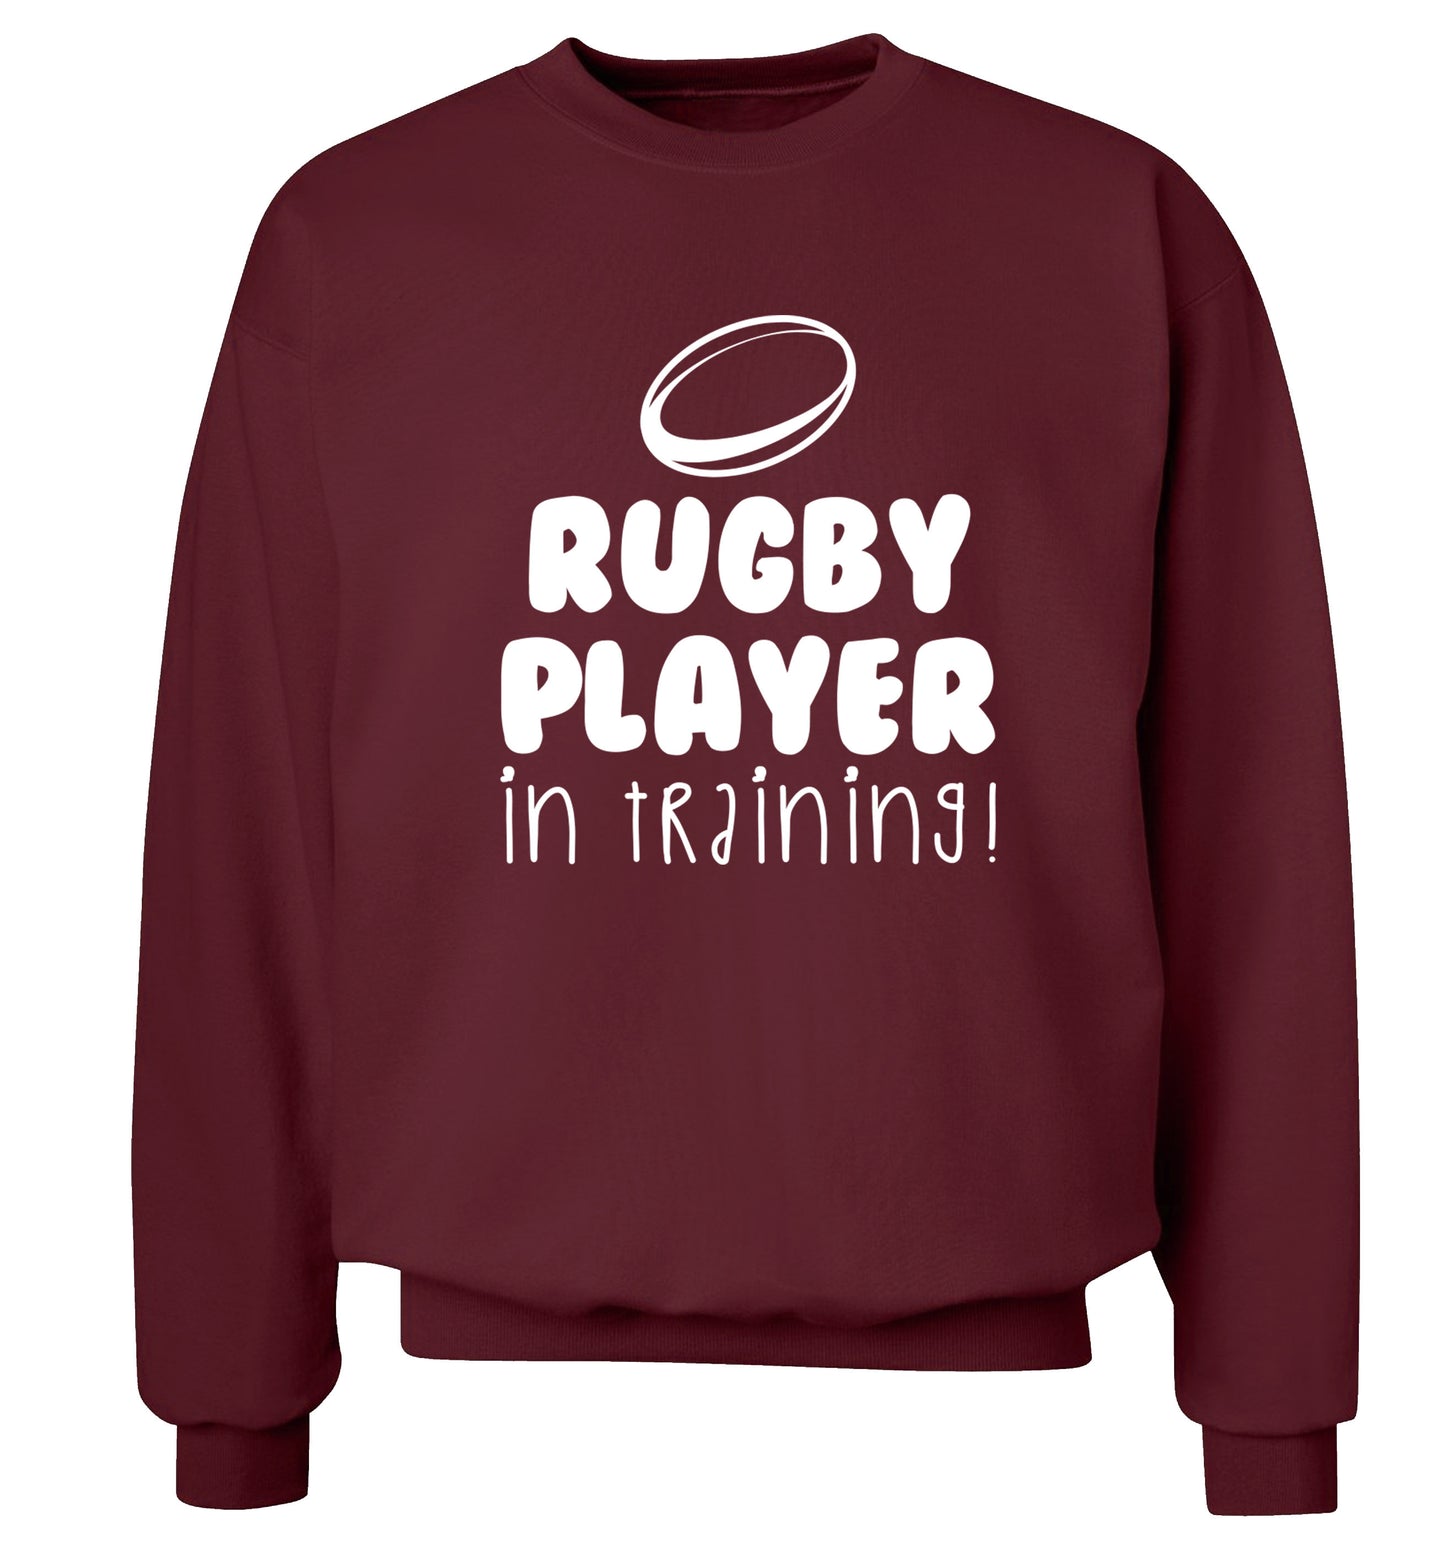 Rugby player in training Adult's unisex maroon Sweater 2XL